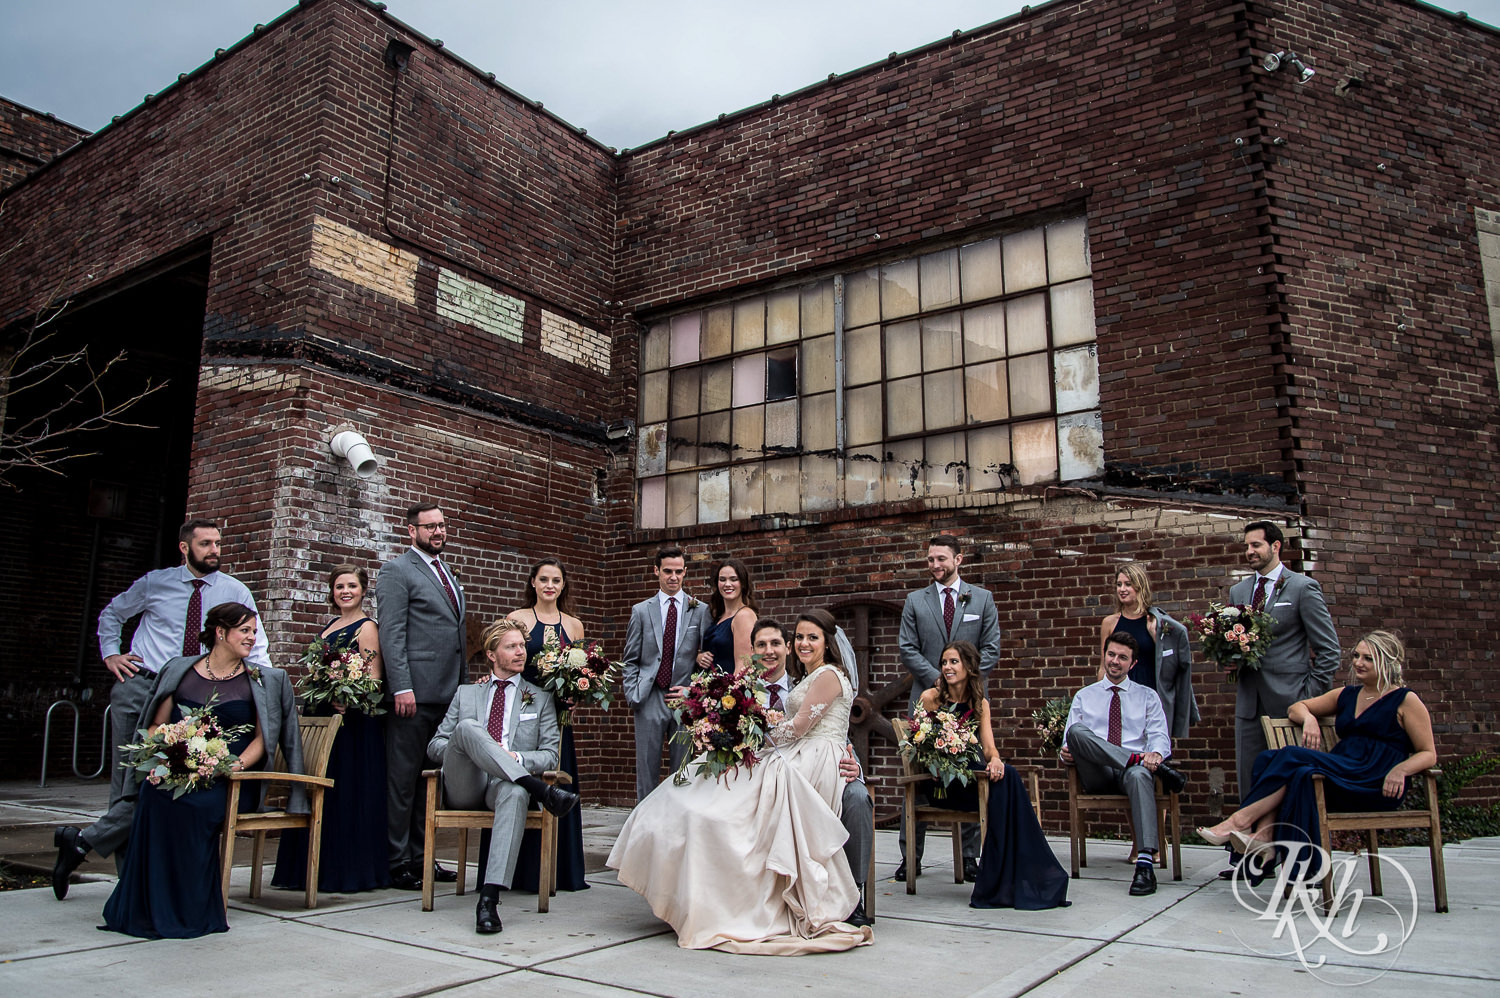 Wedding party and bride and groom smile against brick wall on a rainy wedding day in Minneapolis, Minnesota.